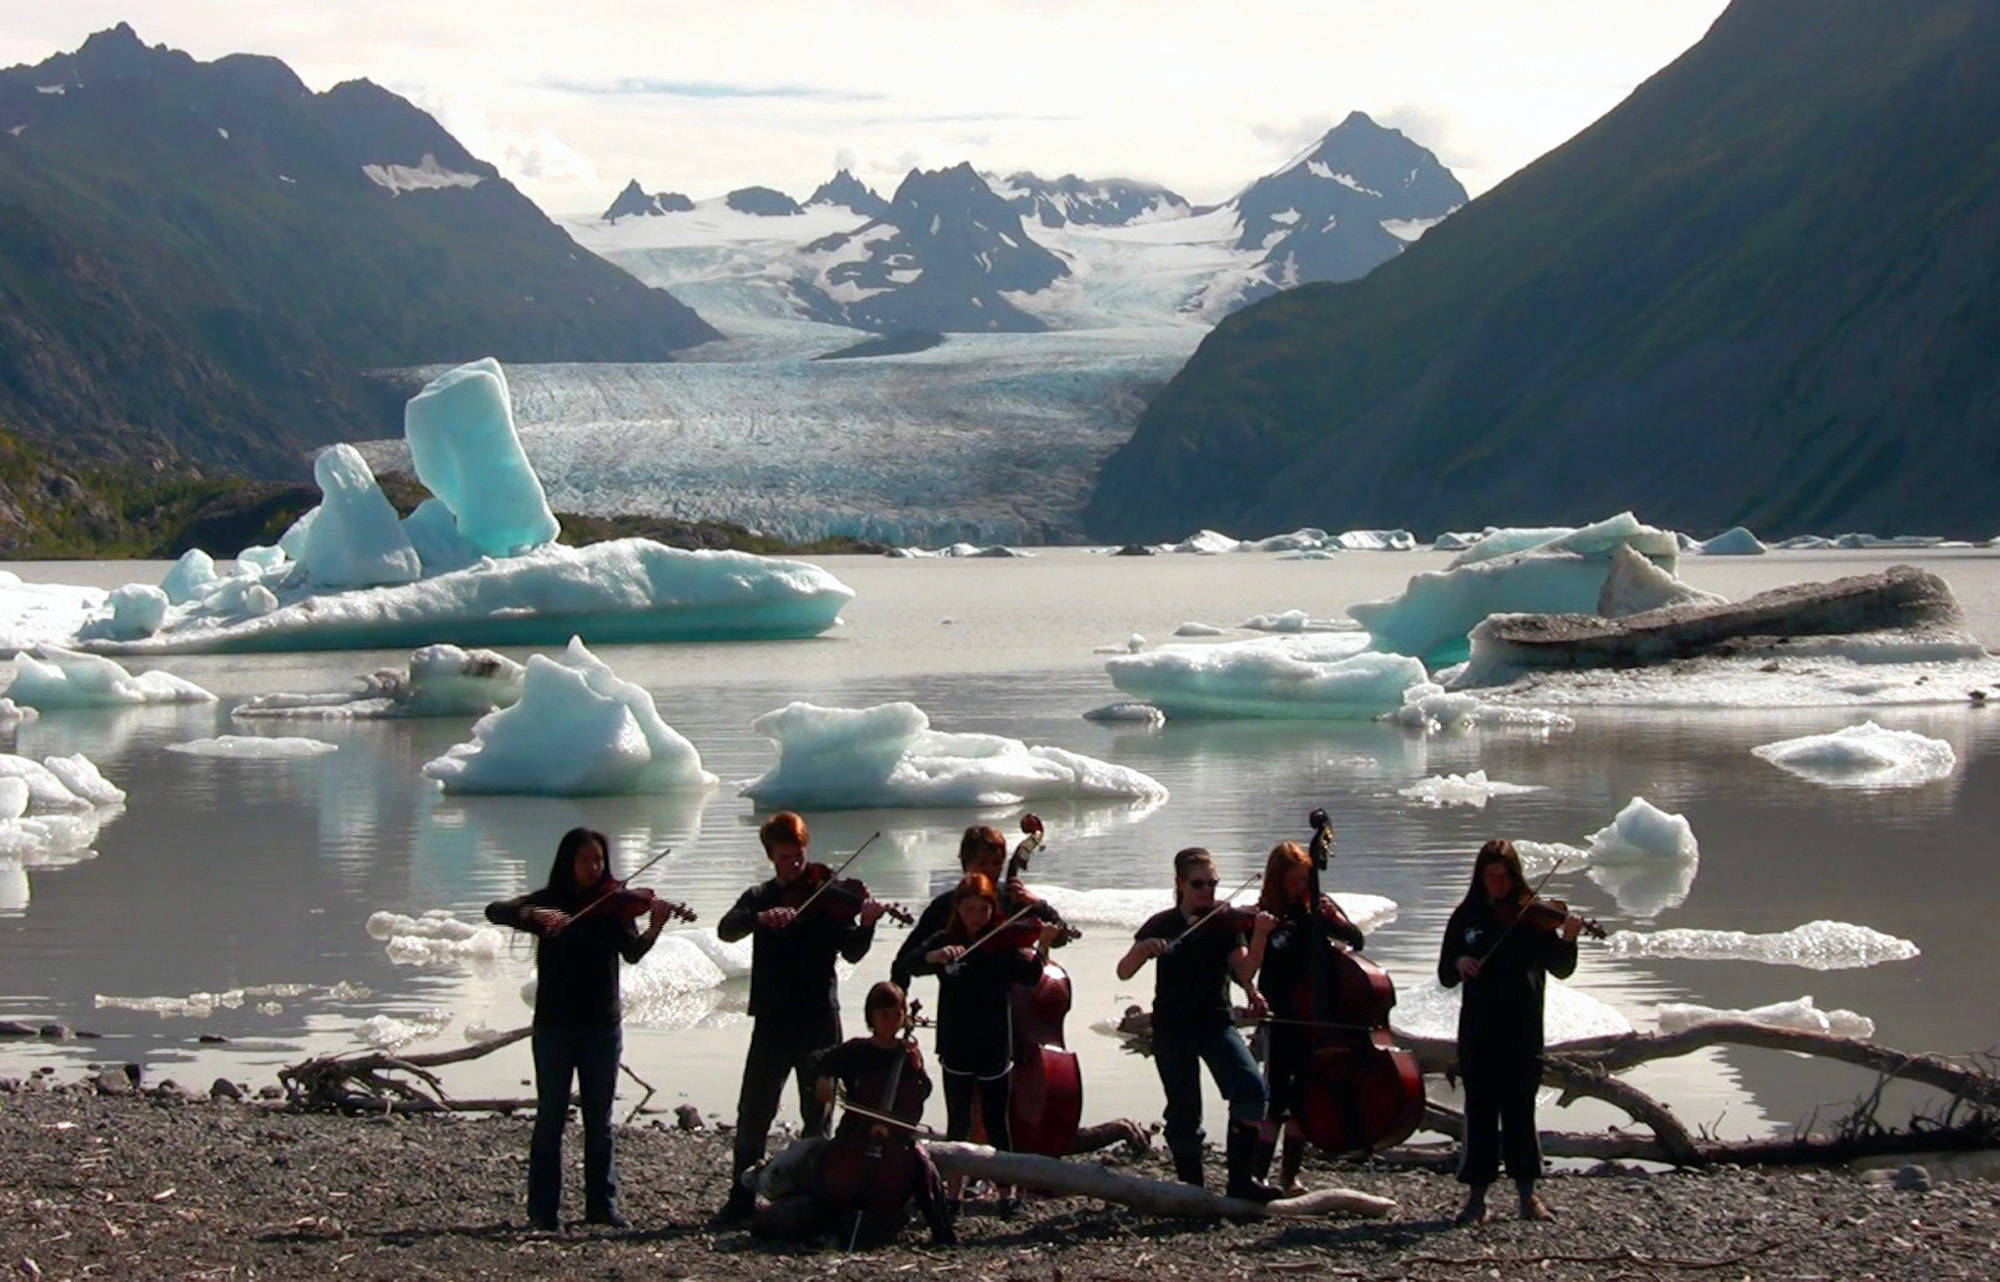 The Homer Youth String Orchestra performs at Grewingk Glacier in August as part of the filming of “Blue Ice.” (Photo submitted)